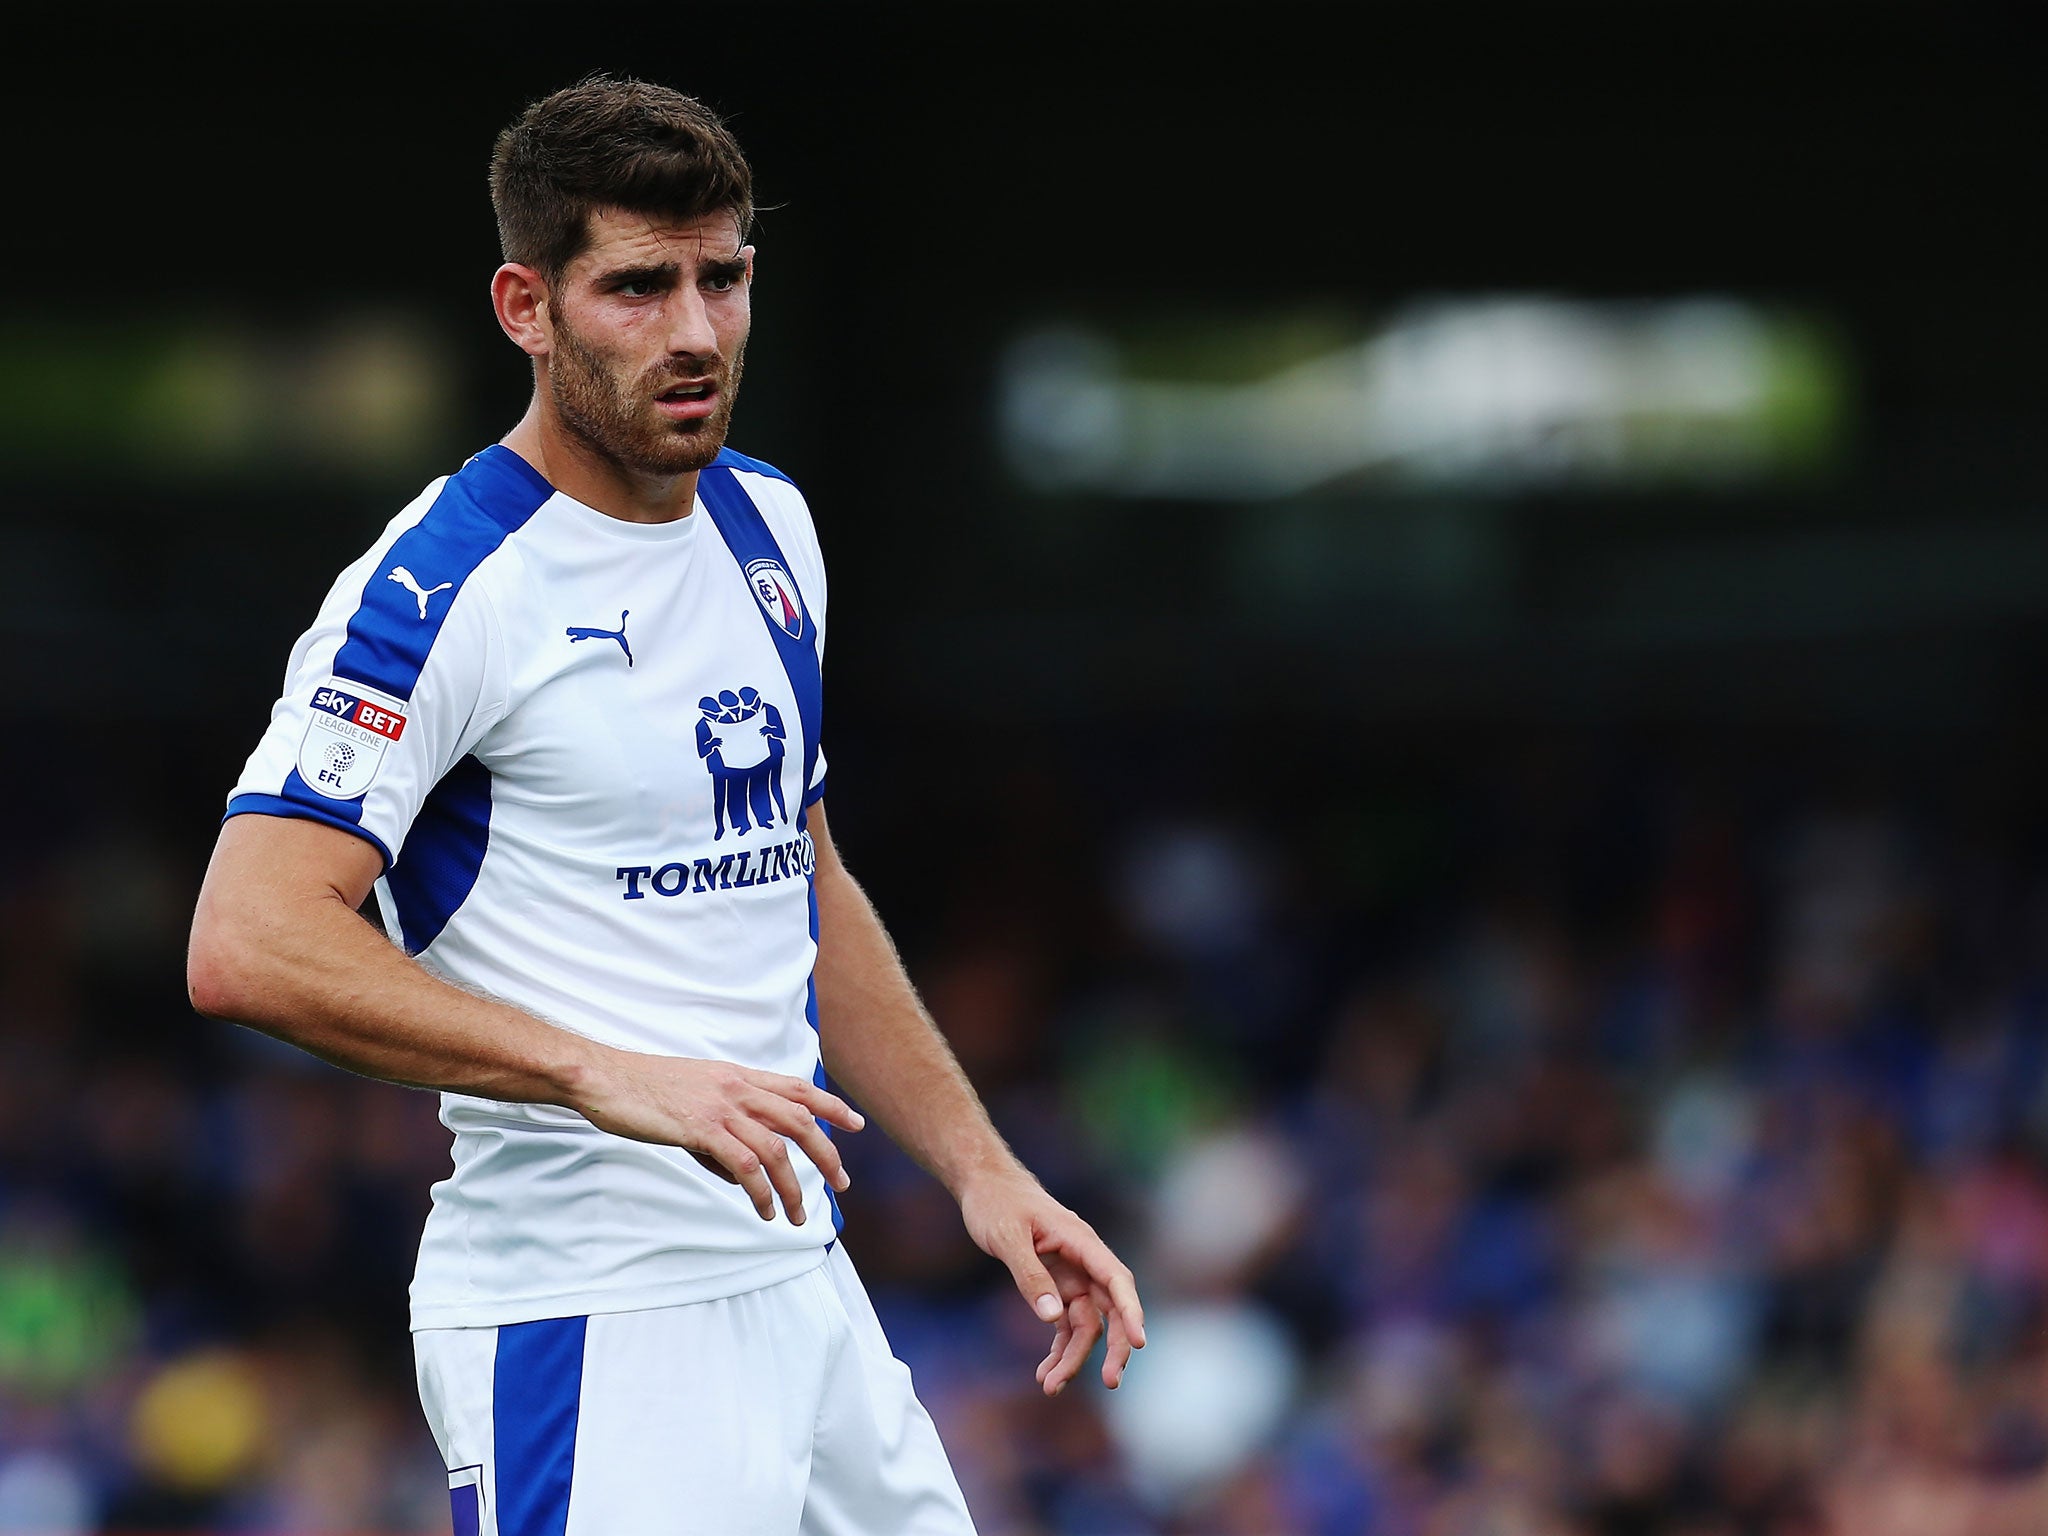 Ched Evans will leave Chesterfield and return to the Blades